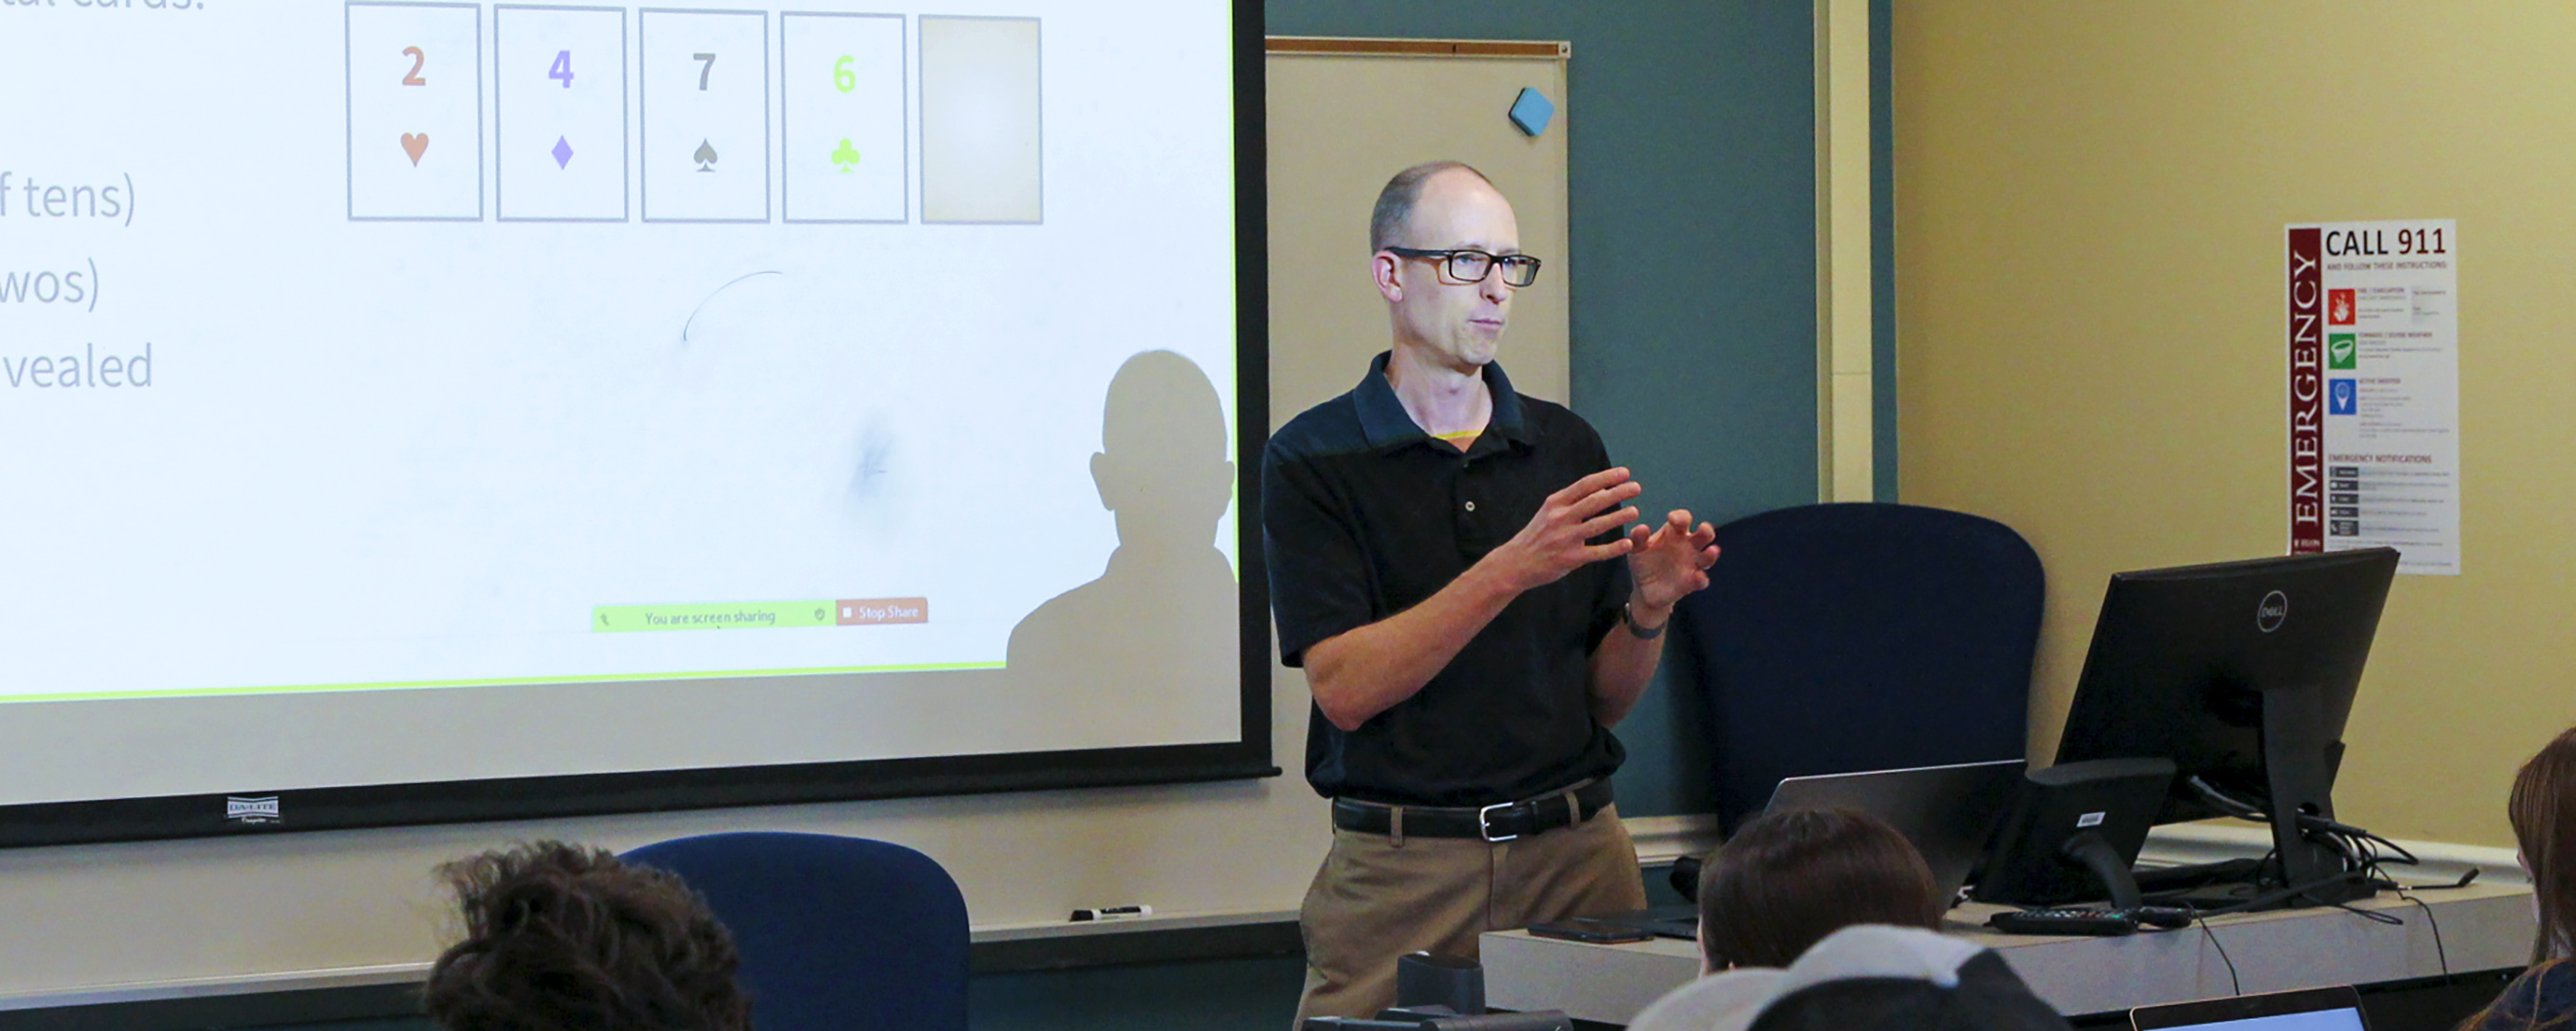 Professor of Computer Science Duke Hutchings teaching in front of a projector screen.